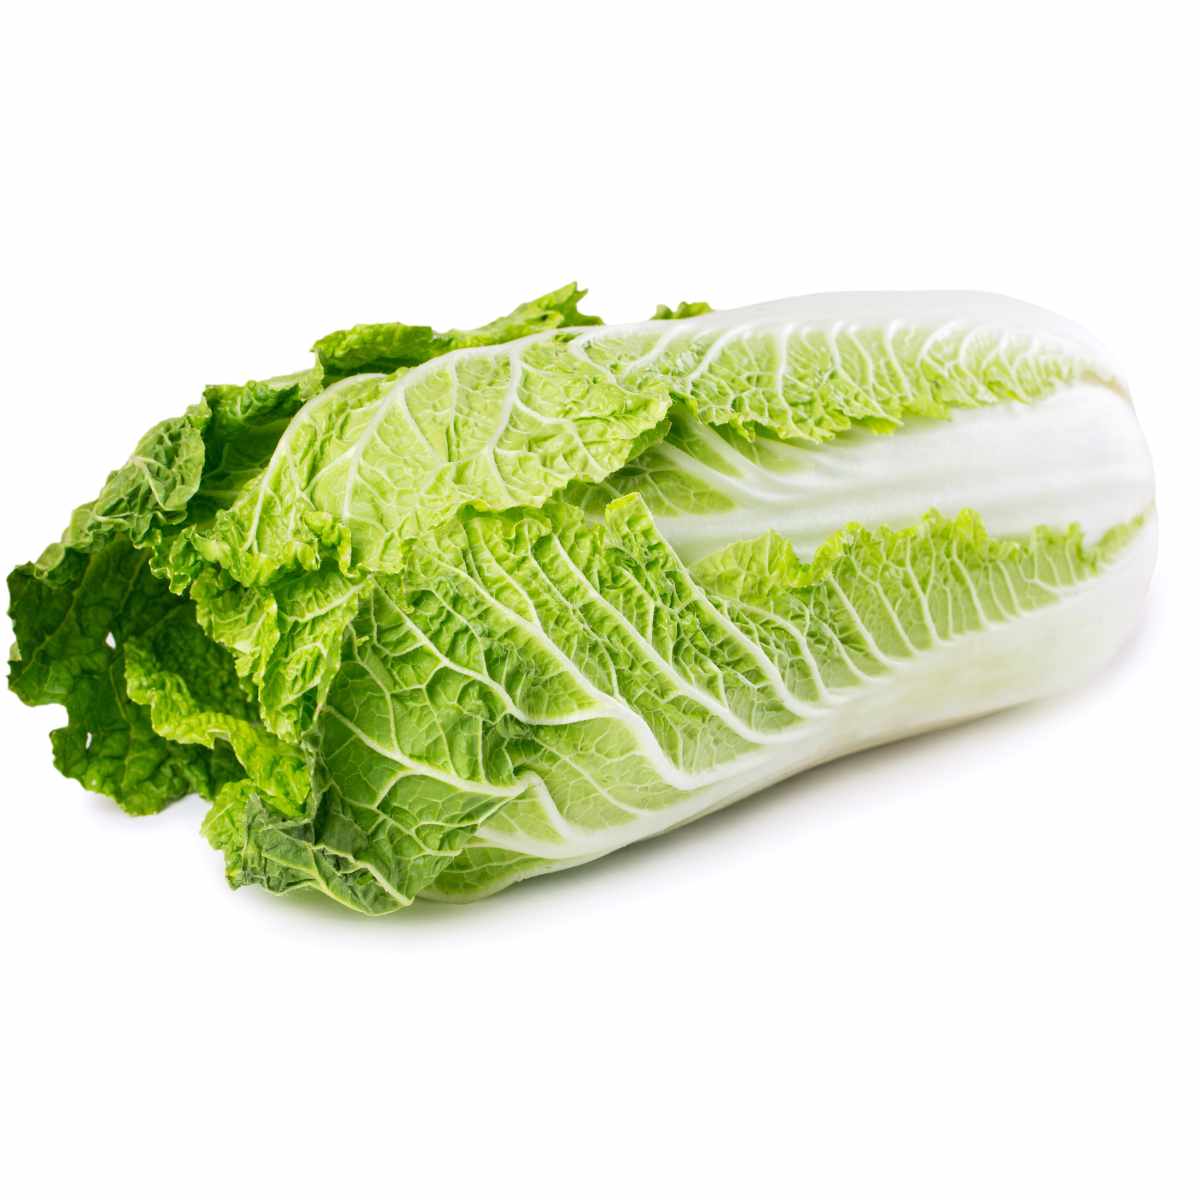 chinese cabbage on a white background.